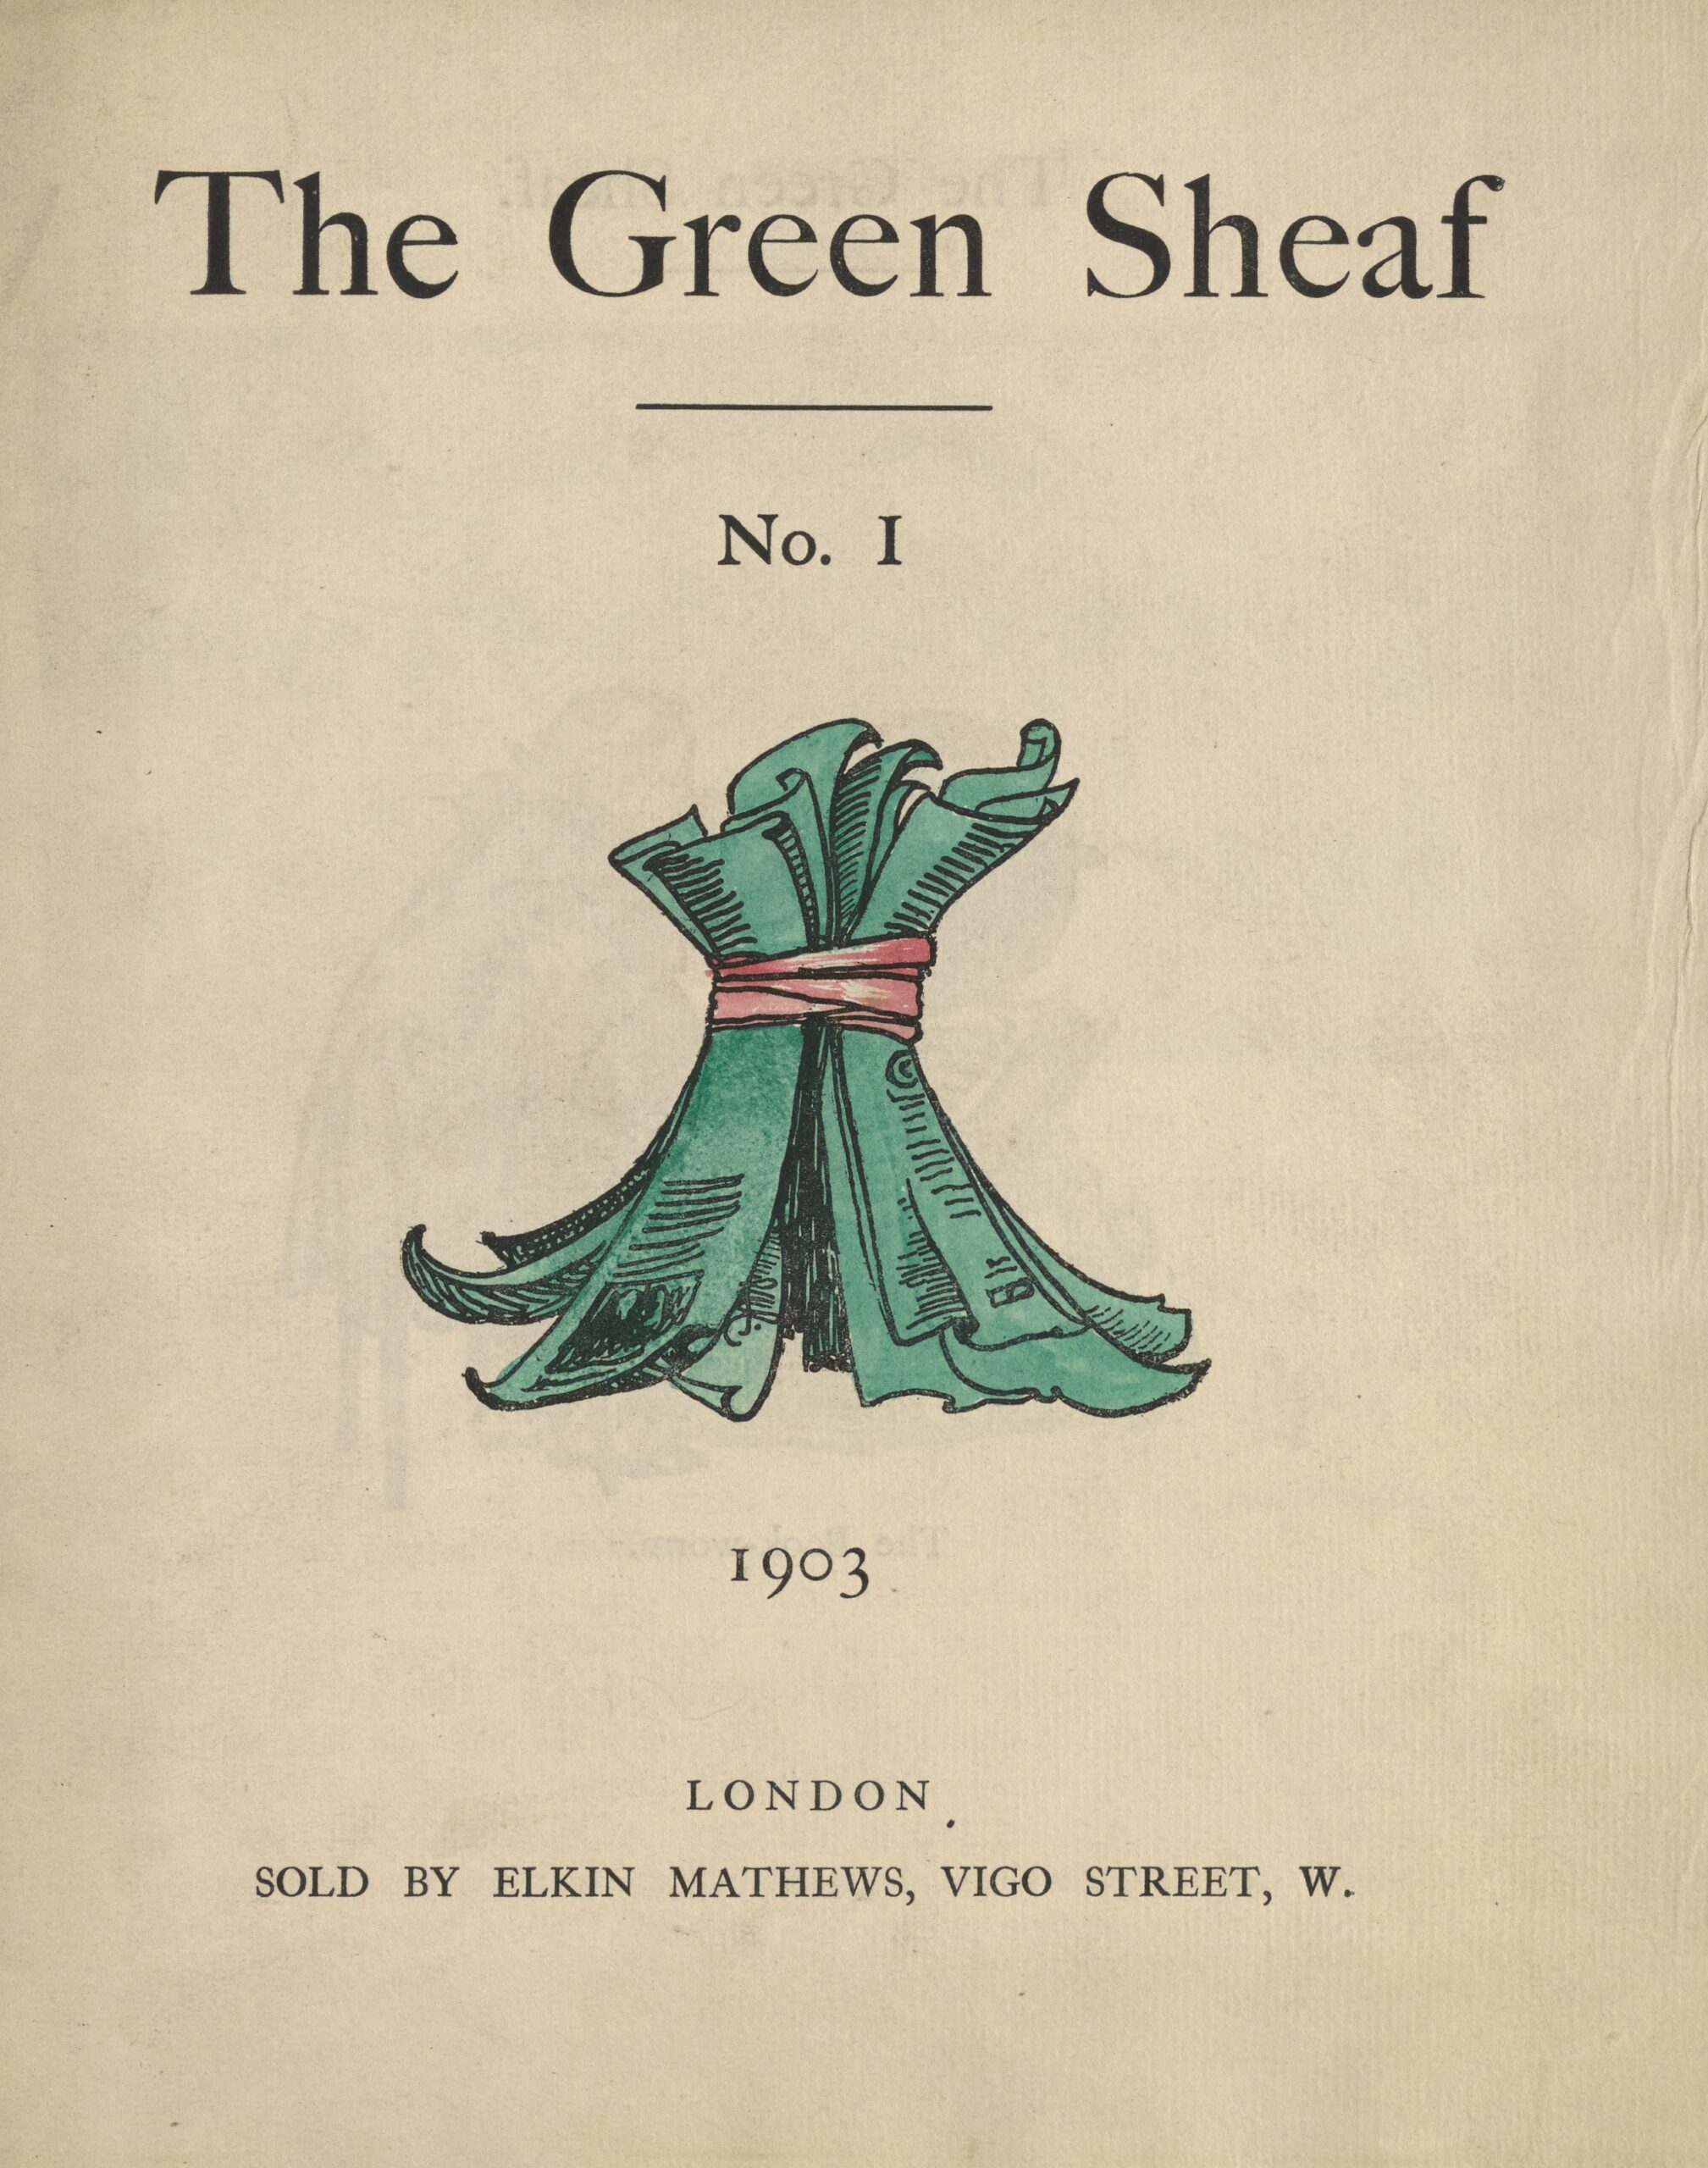 The unframed hand-coloured illustration is centered on the tan page. Above it, near the top of the page, the text “The Green Sheaf” is printed in black ink in a large serif font. It’s followed by a centered horizontal line, then the text “No. 1” in a smaller font. Below this is the central image, which depicts green-coloured pages, stacked to stand like a wheat sheaf, tied together with a red ribbon. The artist’s monogram is visible on one of the pages, which are lined to indicate type, with a rectangular sketch indicating an illustration. Below the Green Sheaf icon, centered on the page, is the year, 1903, followed, in slightly smaller text, by “LONDON / SOLD BY ELKIN MATTHEWS, VIGO STREET, W.”